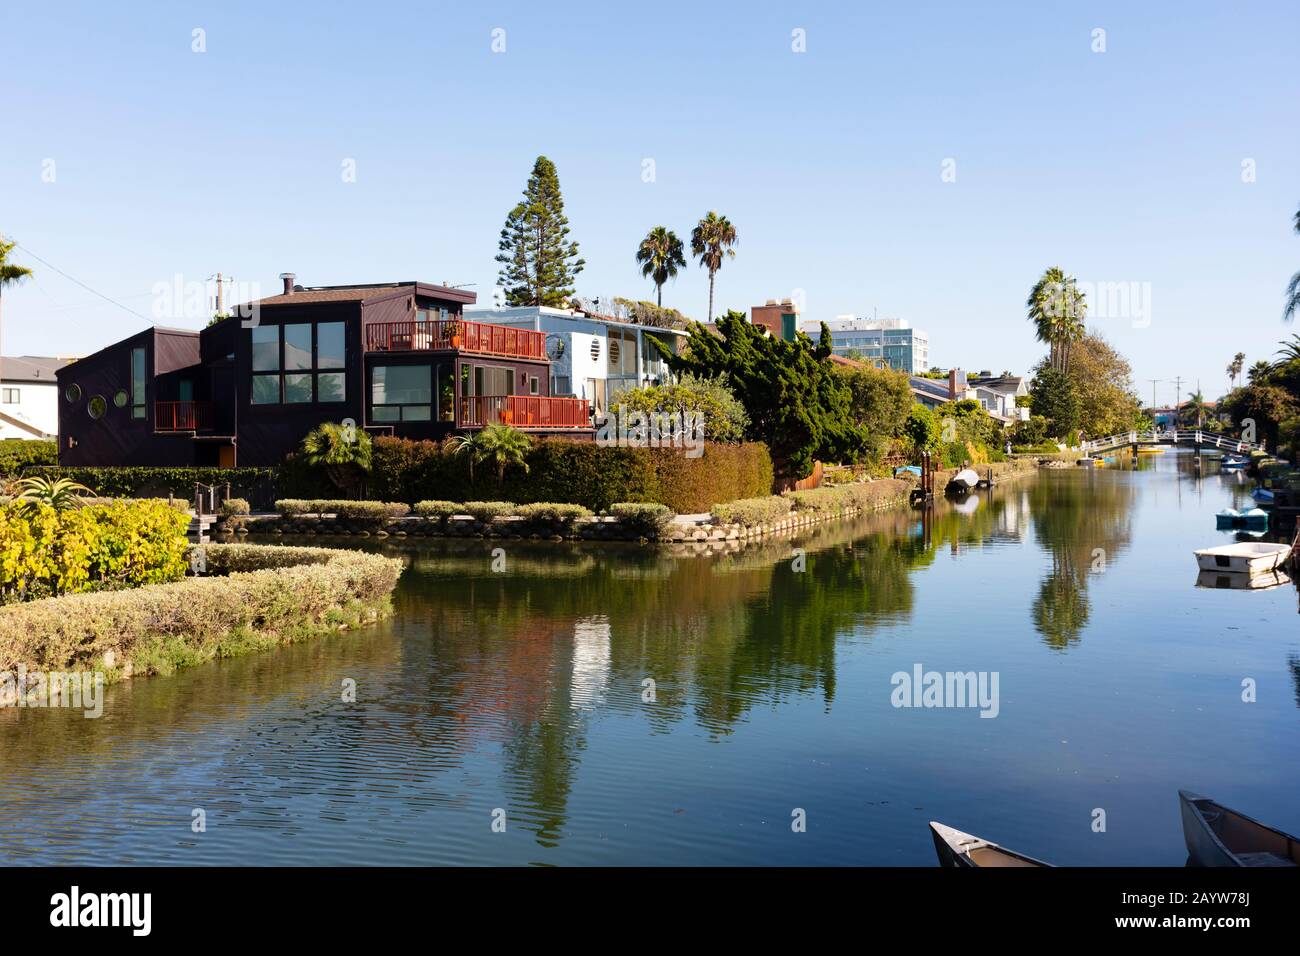 Luxury houses on Venice canals, Santa Monica, California, United States of america. USA. October 2019 Stock Photo